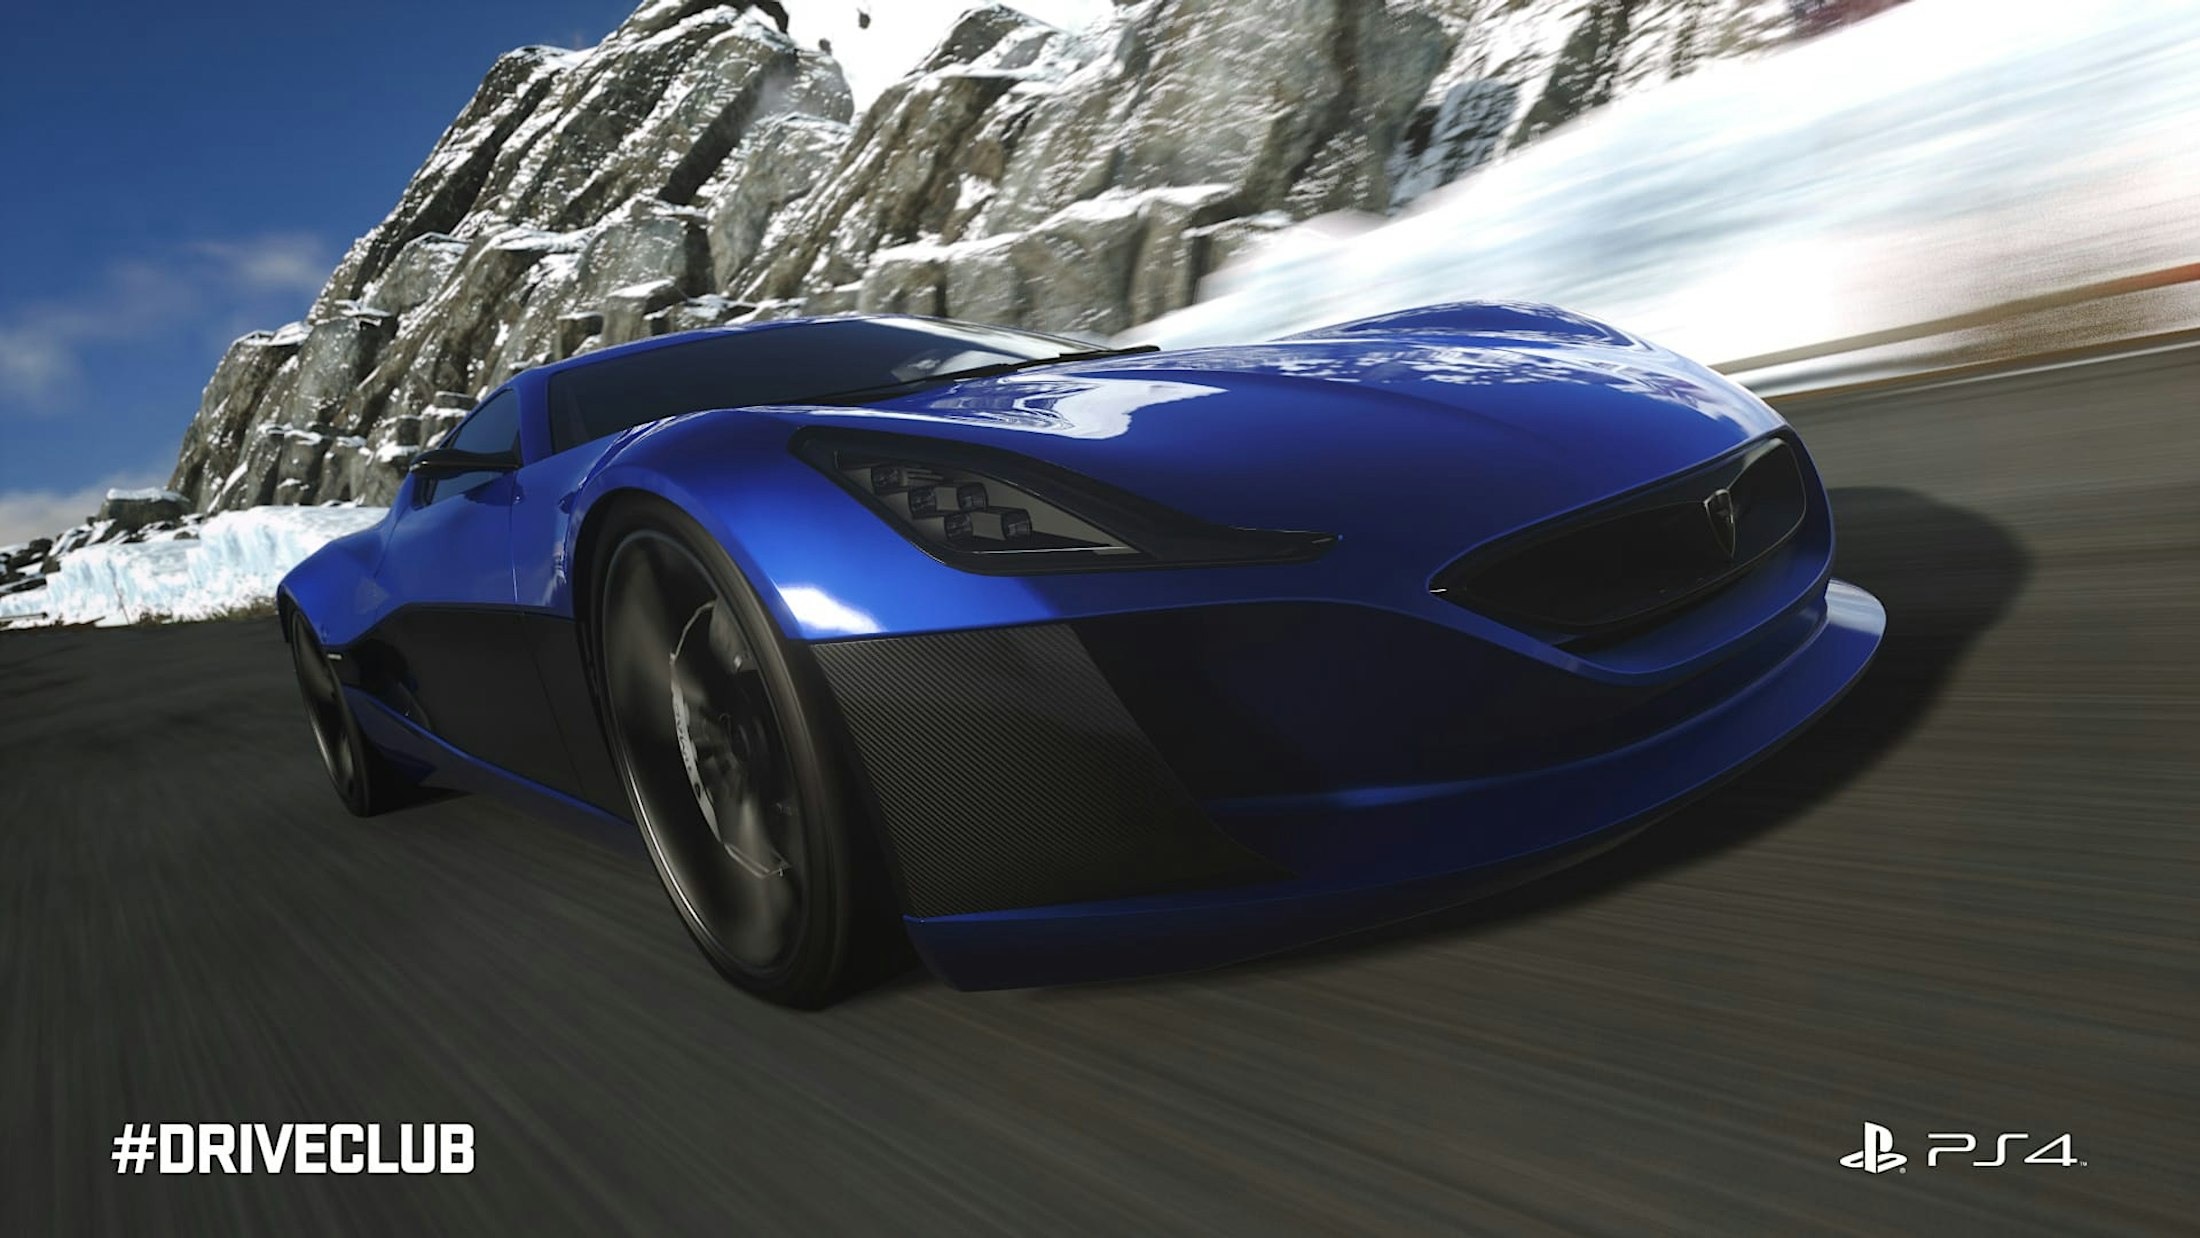 Rimac Automobili Concept_One introduced in Driveclub